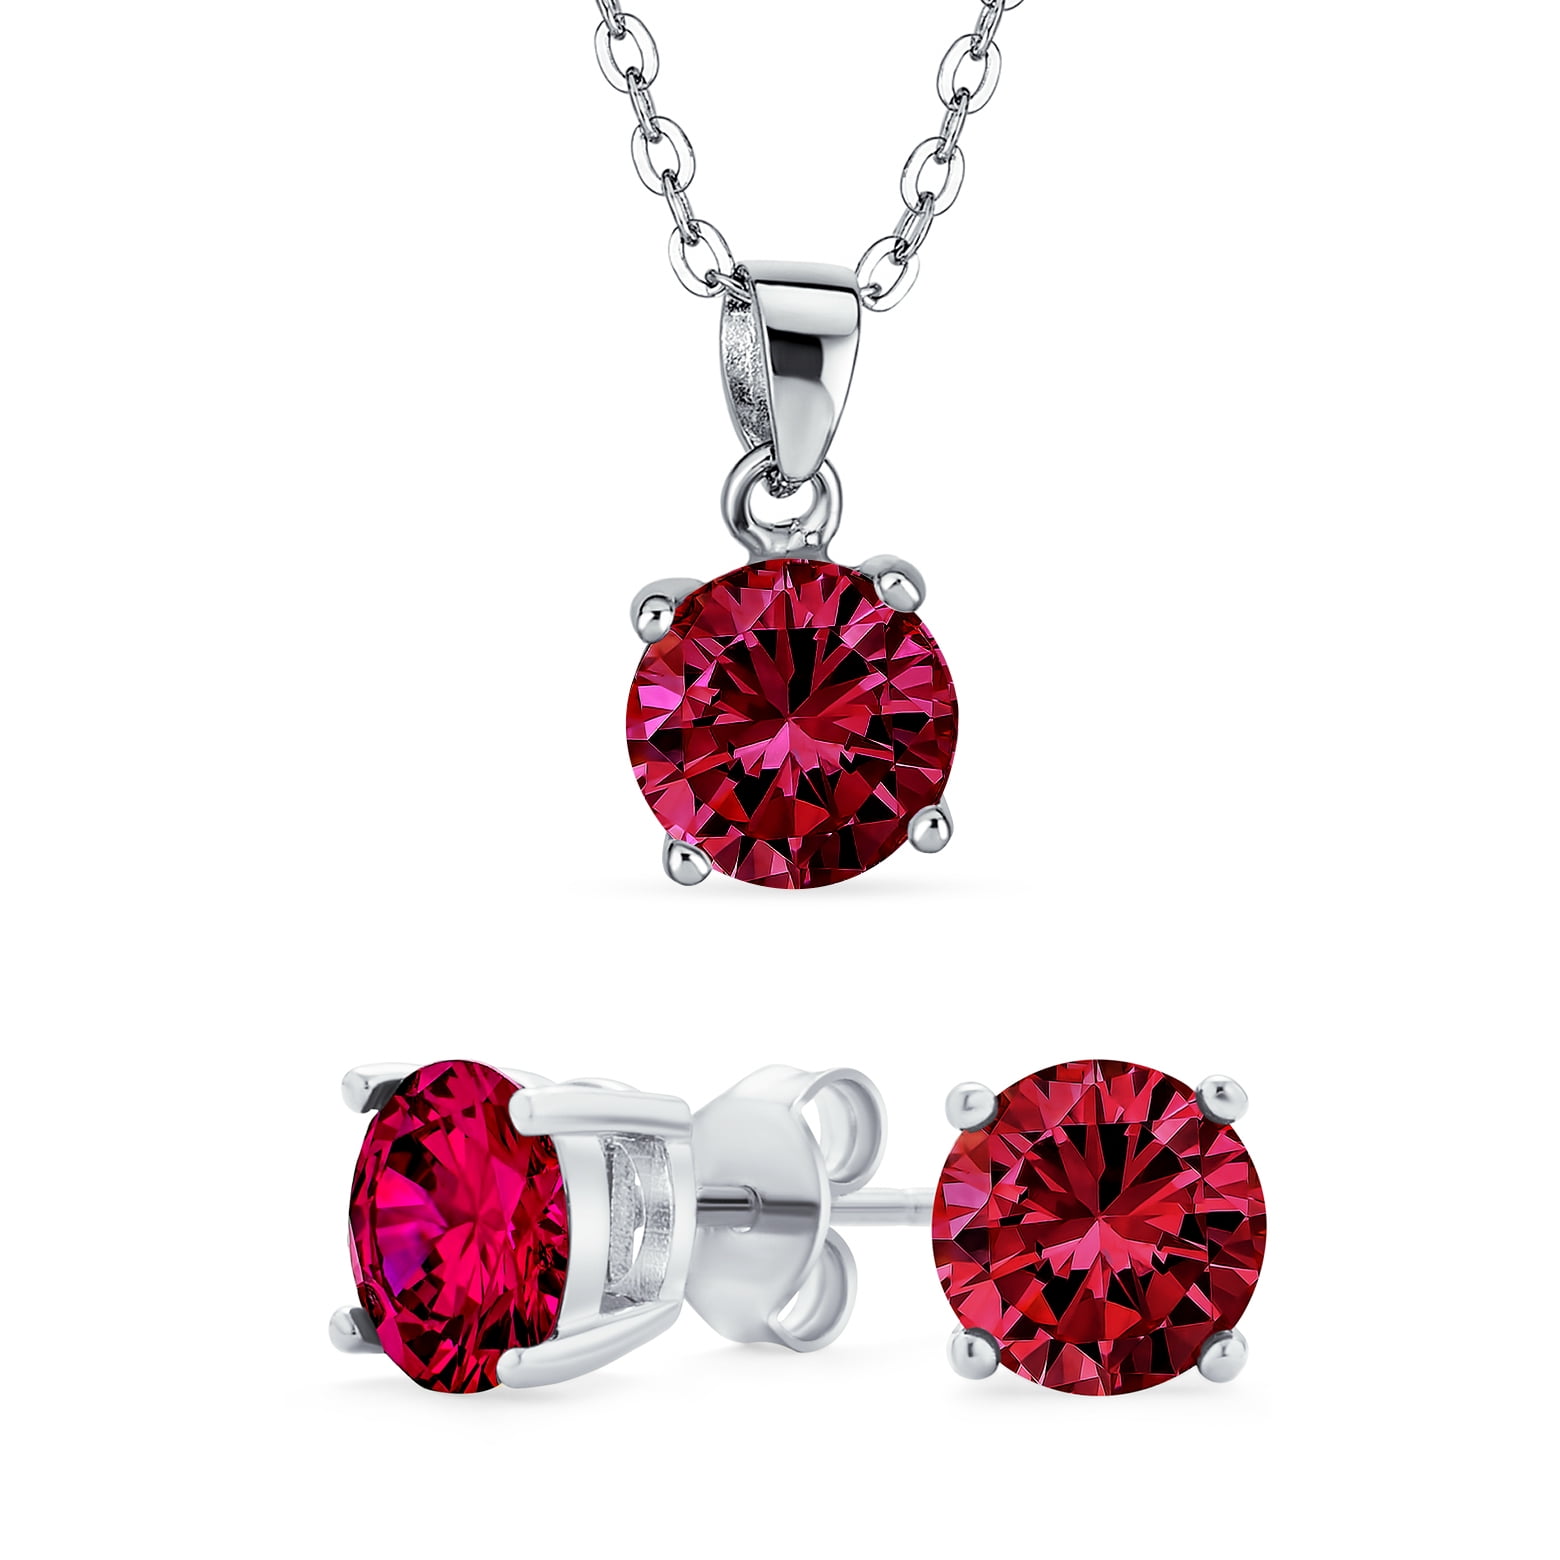 Faceted Stone Flower Jewelry Set 925 Silver RED GARNET Earrings Pendant Girls' Beautiful Trendy Jewellery Collection Low Price Fast Shipping